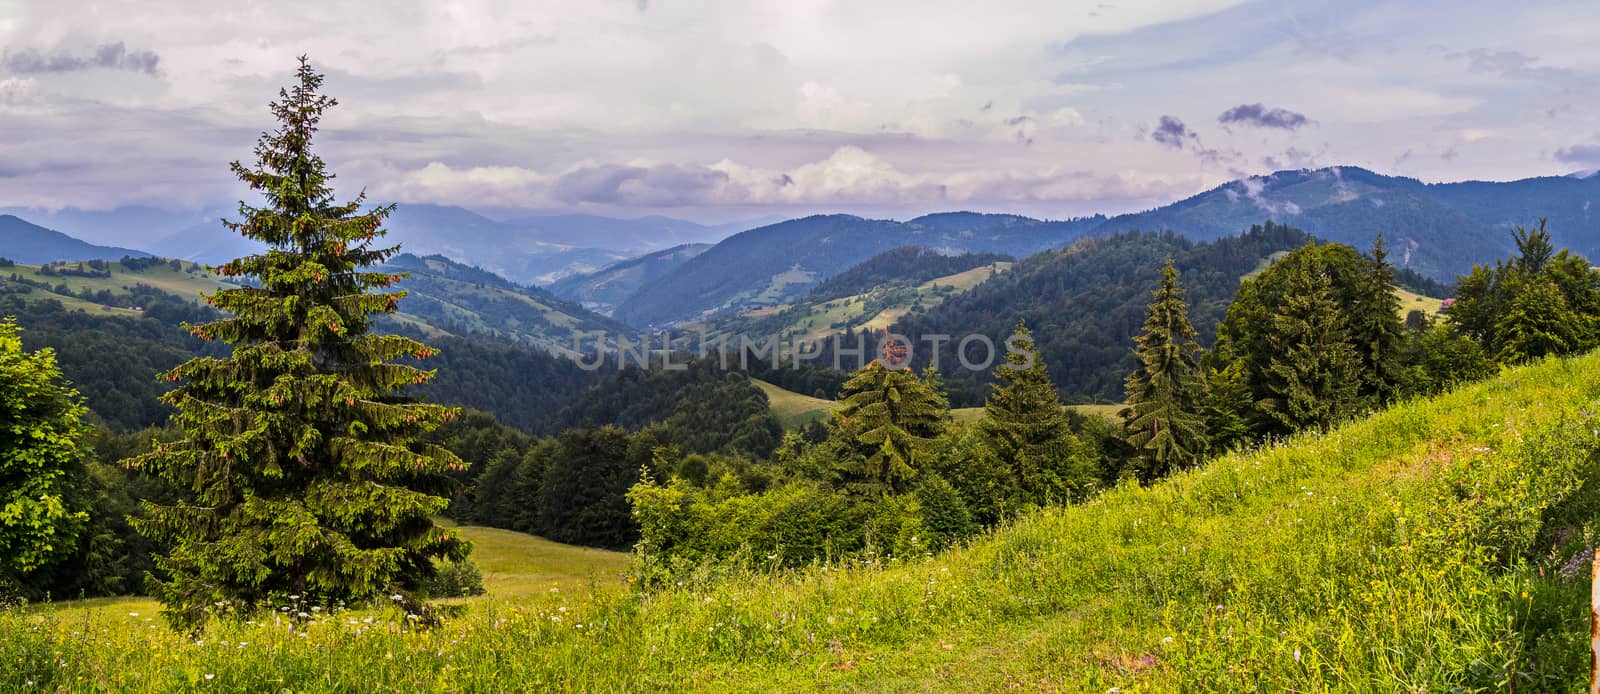 A panorama of forest massifs on mountain slopes and tops that touch upon clouds by Adamchuk